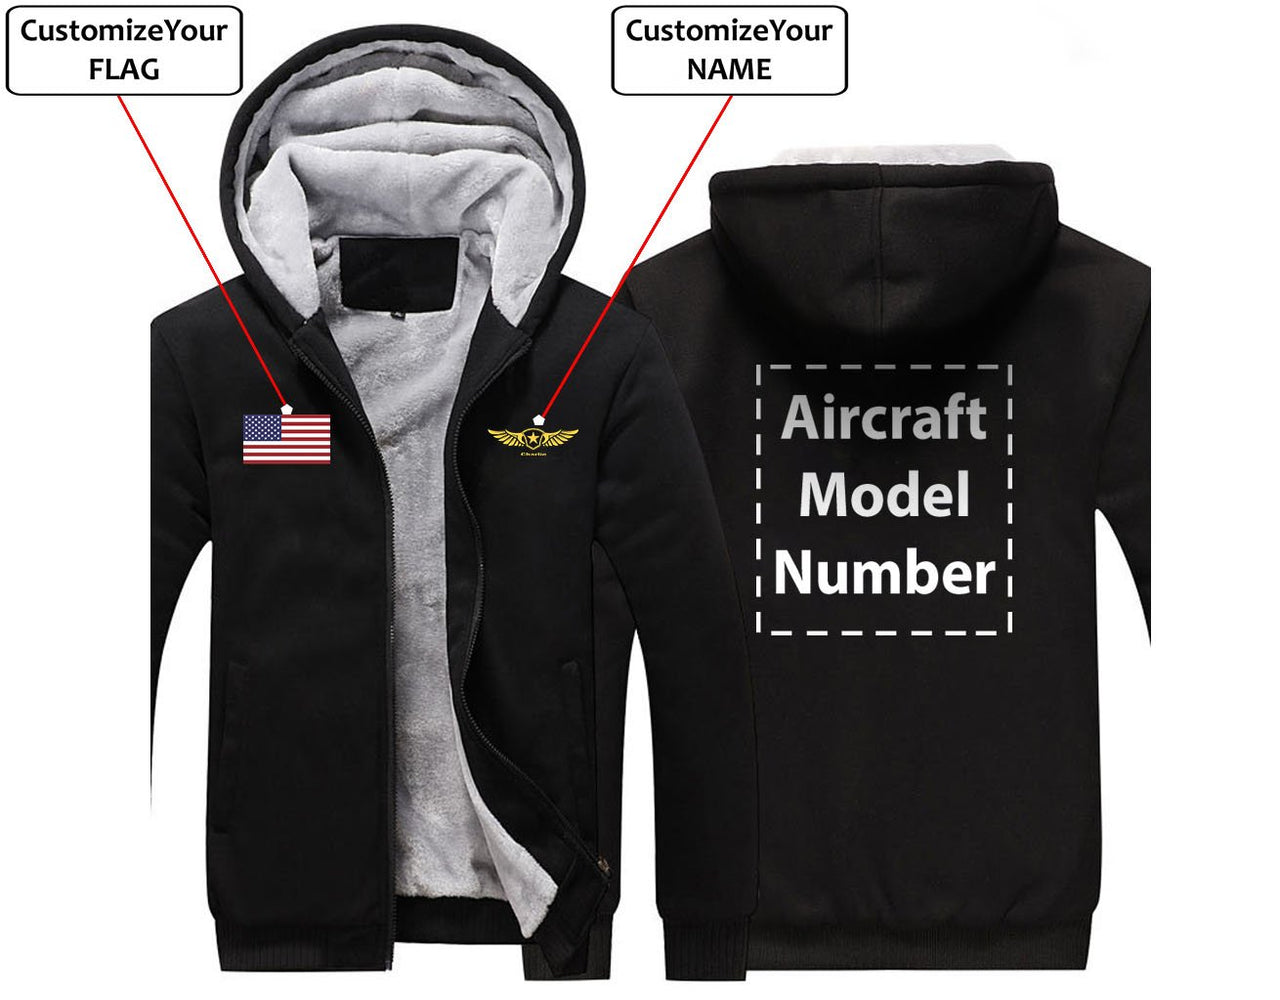 CUSTOM THE FLAG & NAME WITH AIRCRAFT MODEL NUMBER ZIPPER SWEATERS THE AV8R